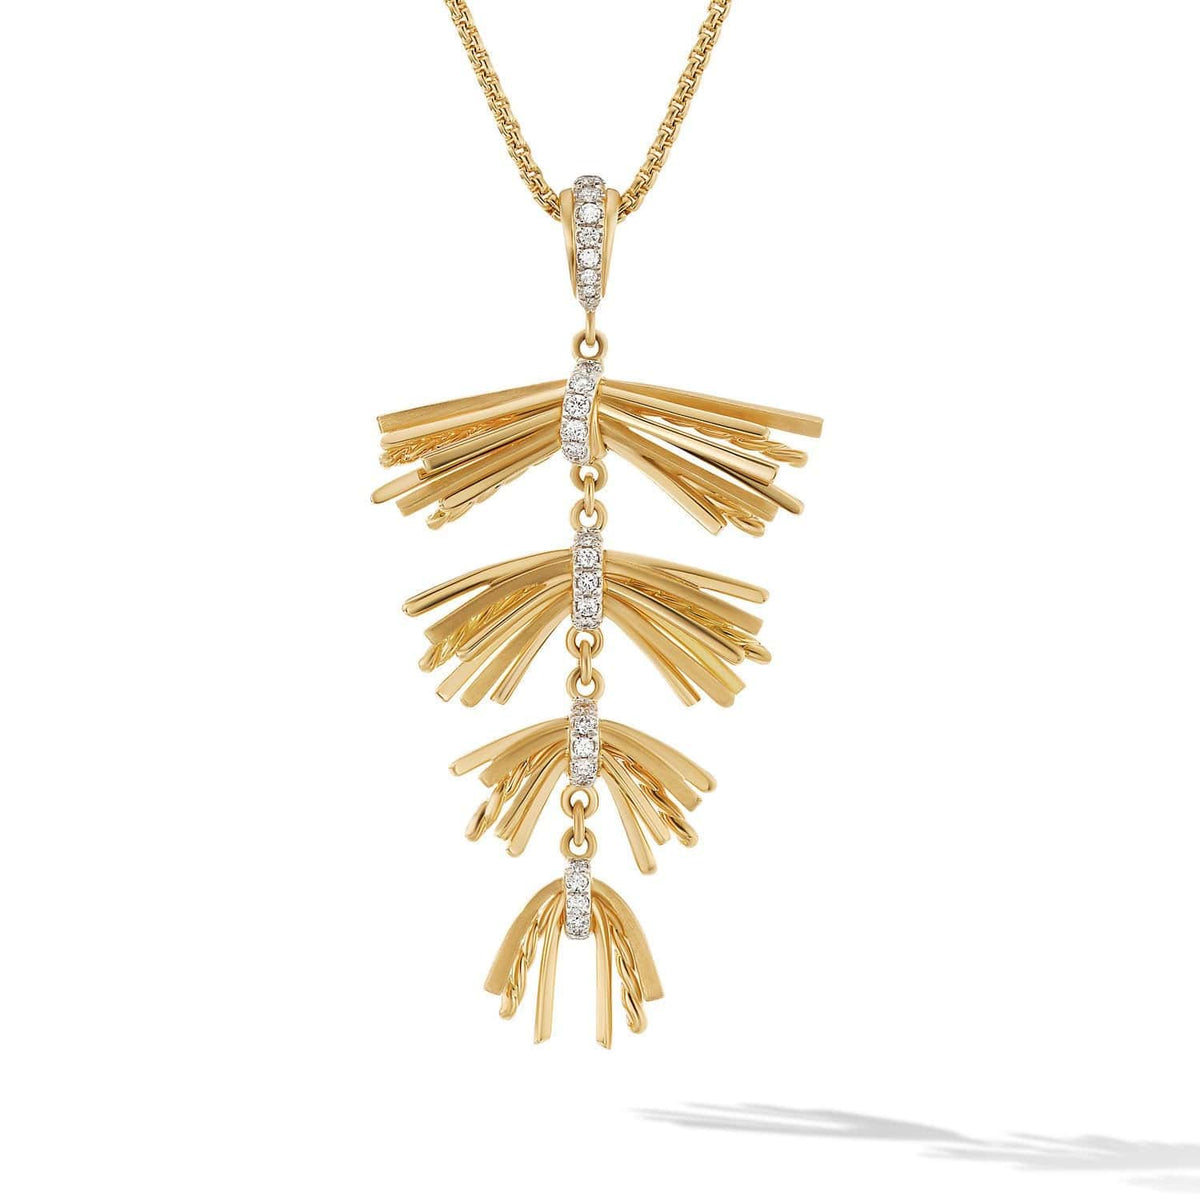 Angelika Fringe Pendant Necklace in 18K Yellow Gold with Pavé Diamonds, Yellow Gold, Long's Jewelers